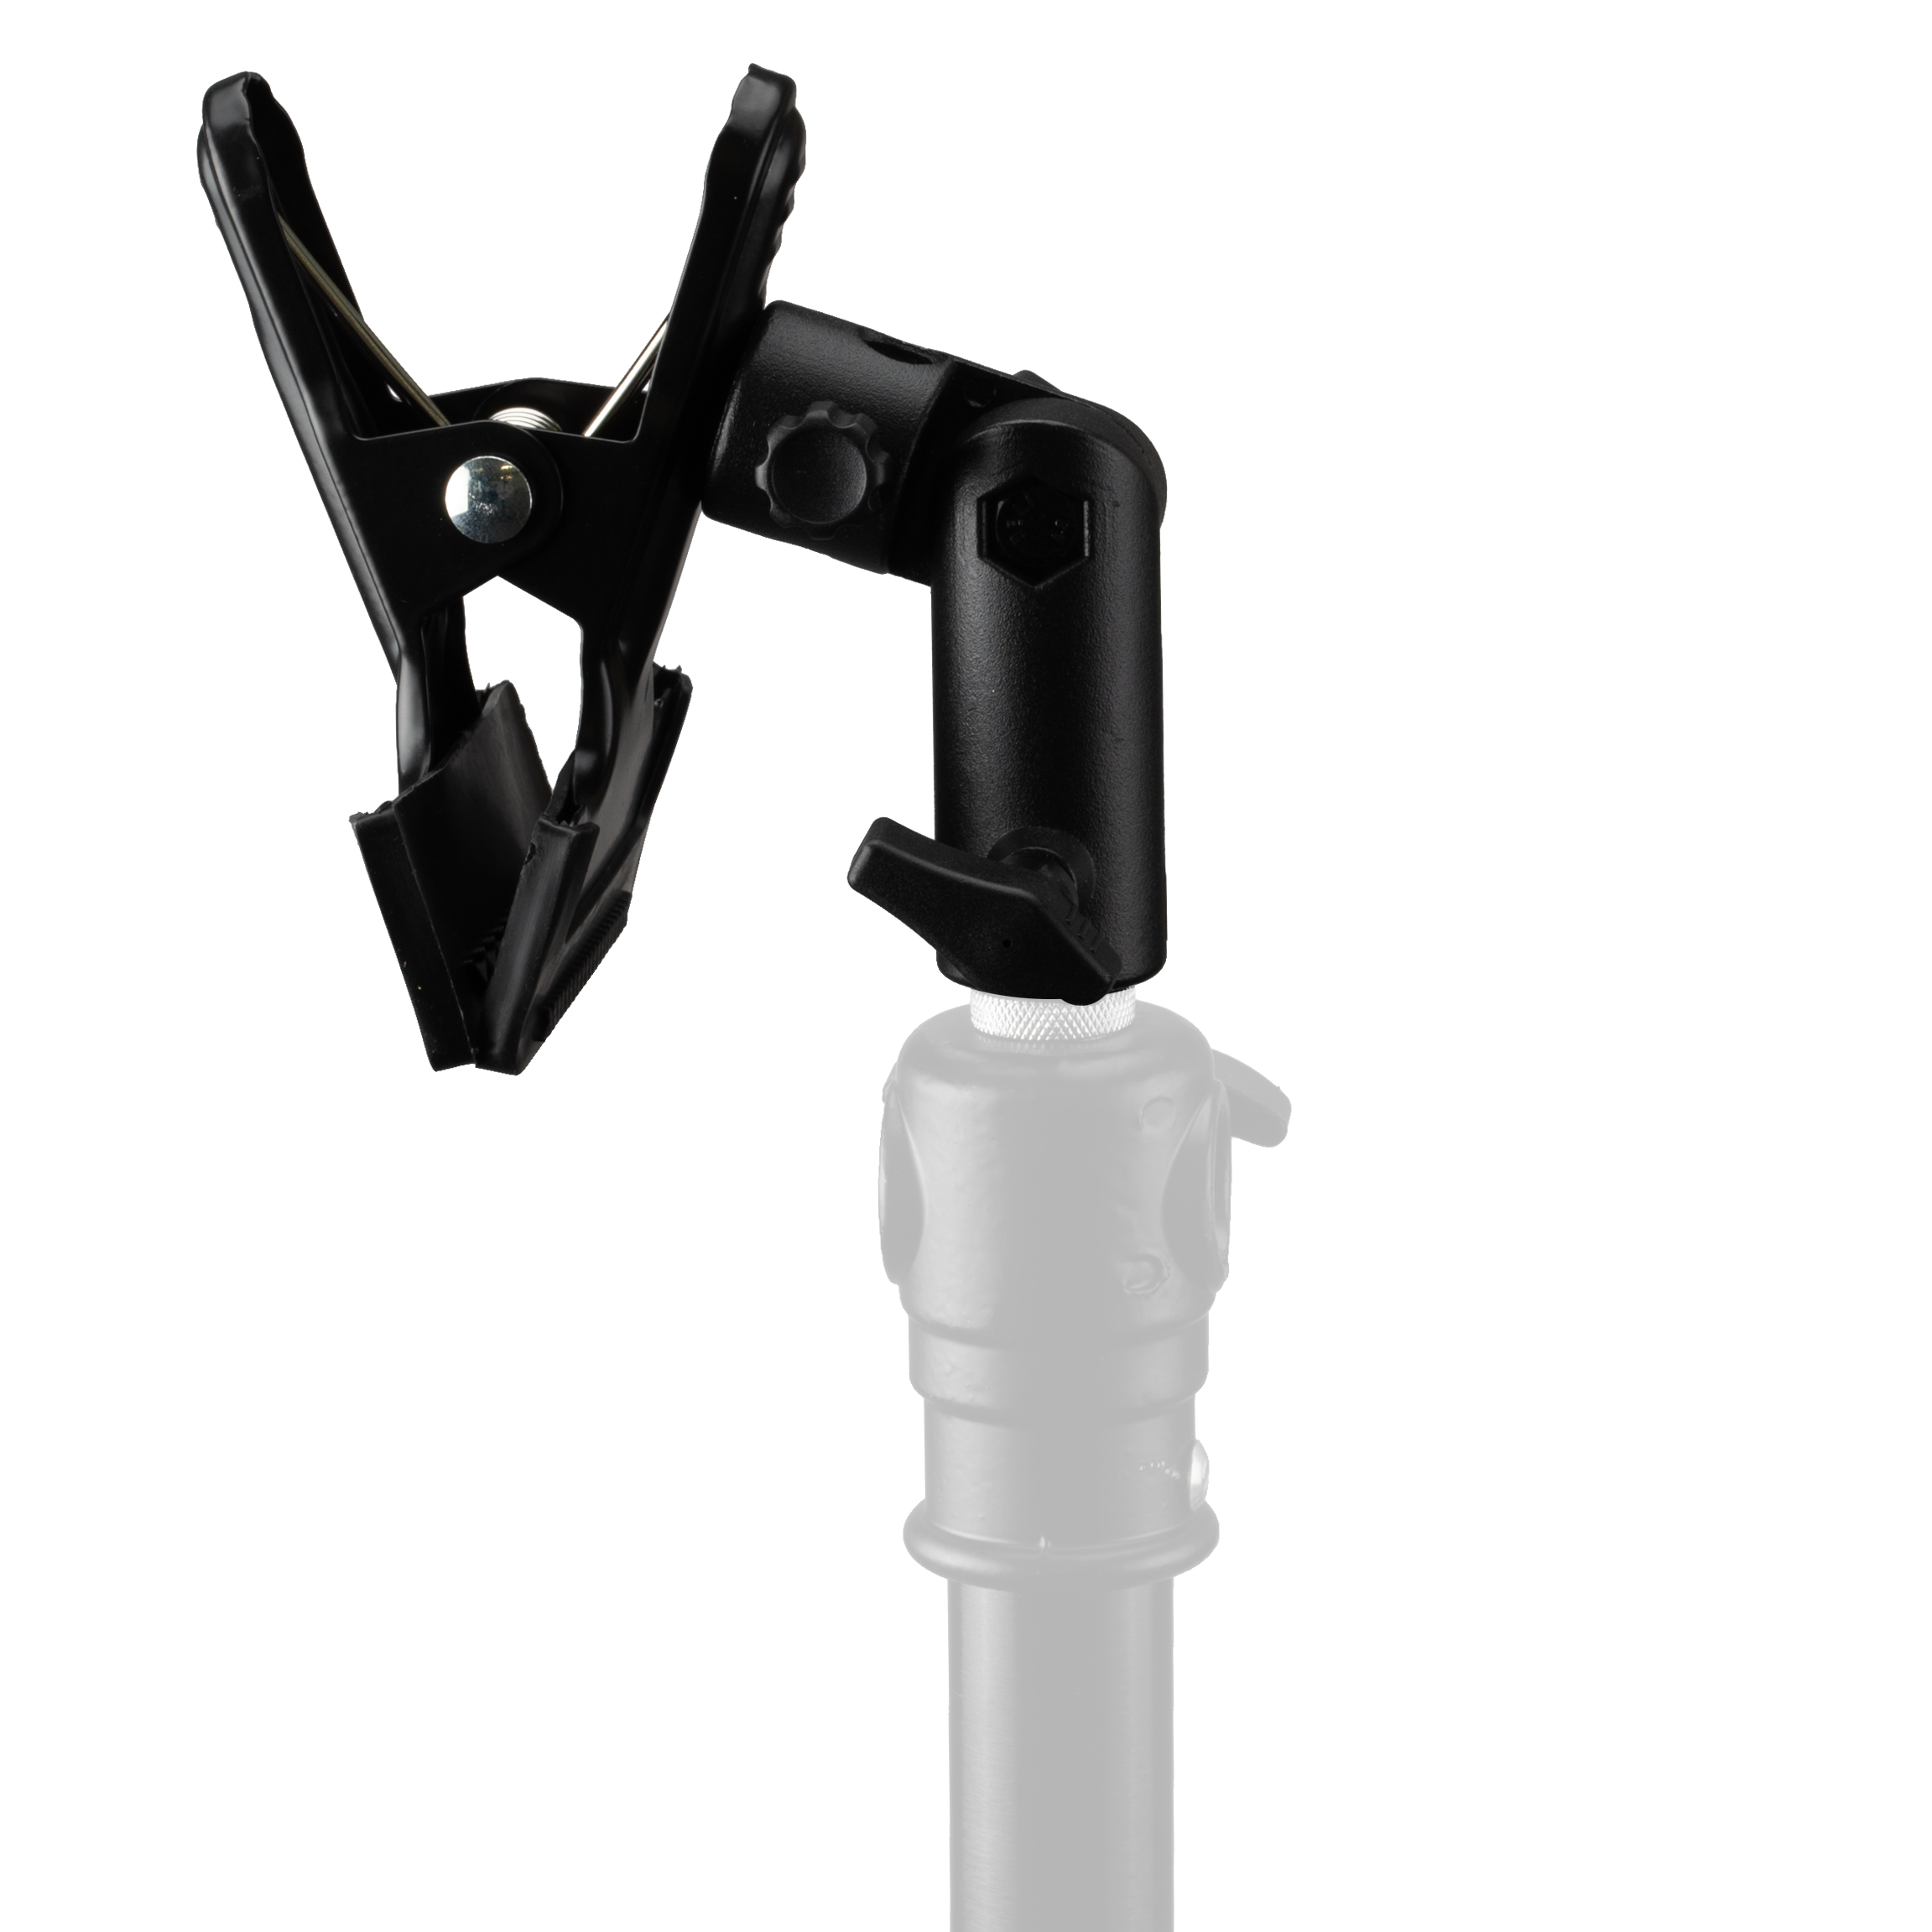 BRESSER BR-6 tiltable Support Clamp for collapsible Reflectors and Backgrounds